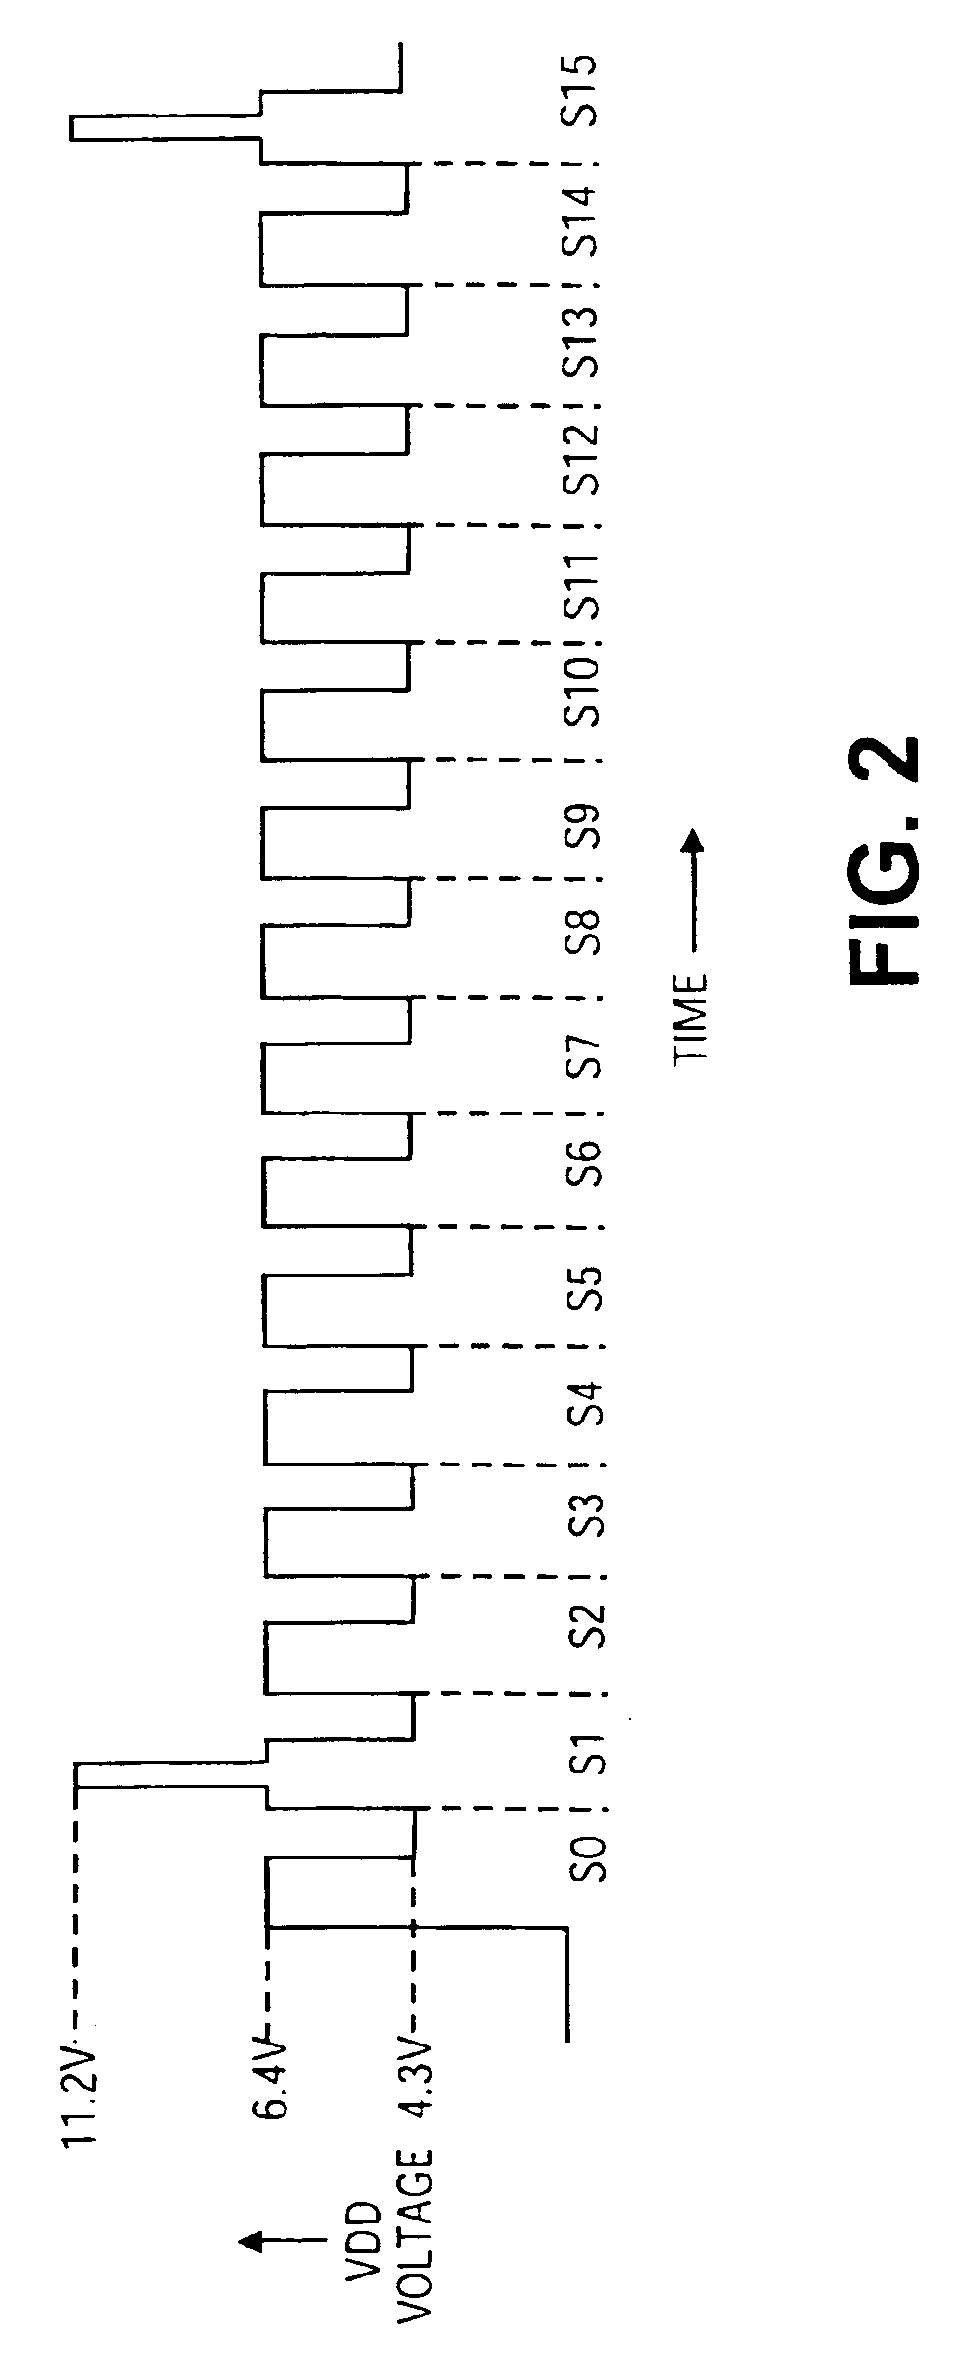 Method and apparatus providing final test and trimming for a power supply controller